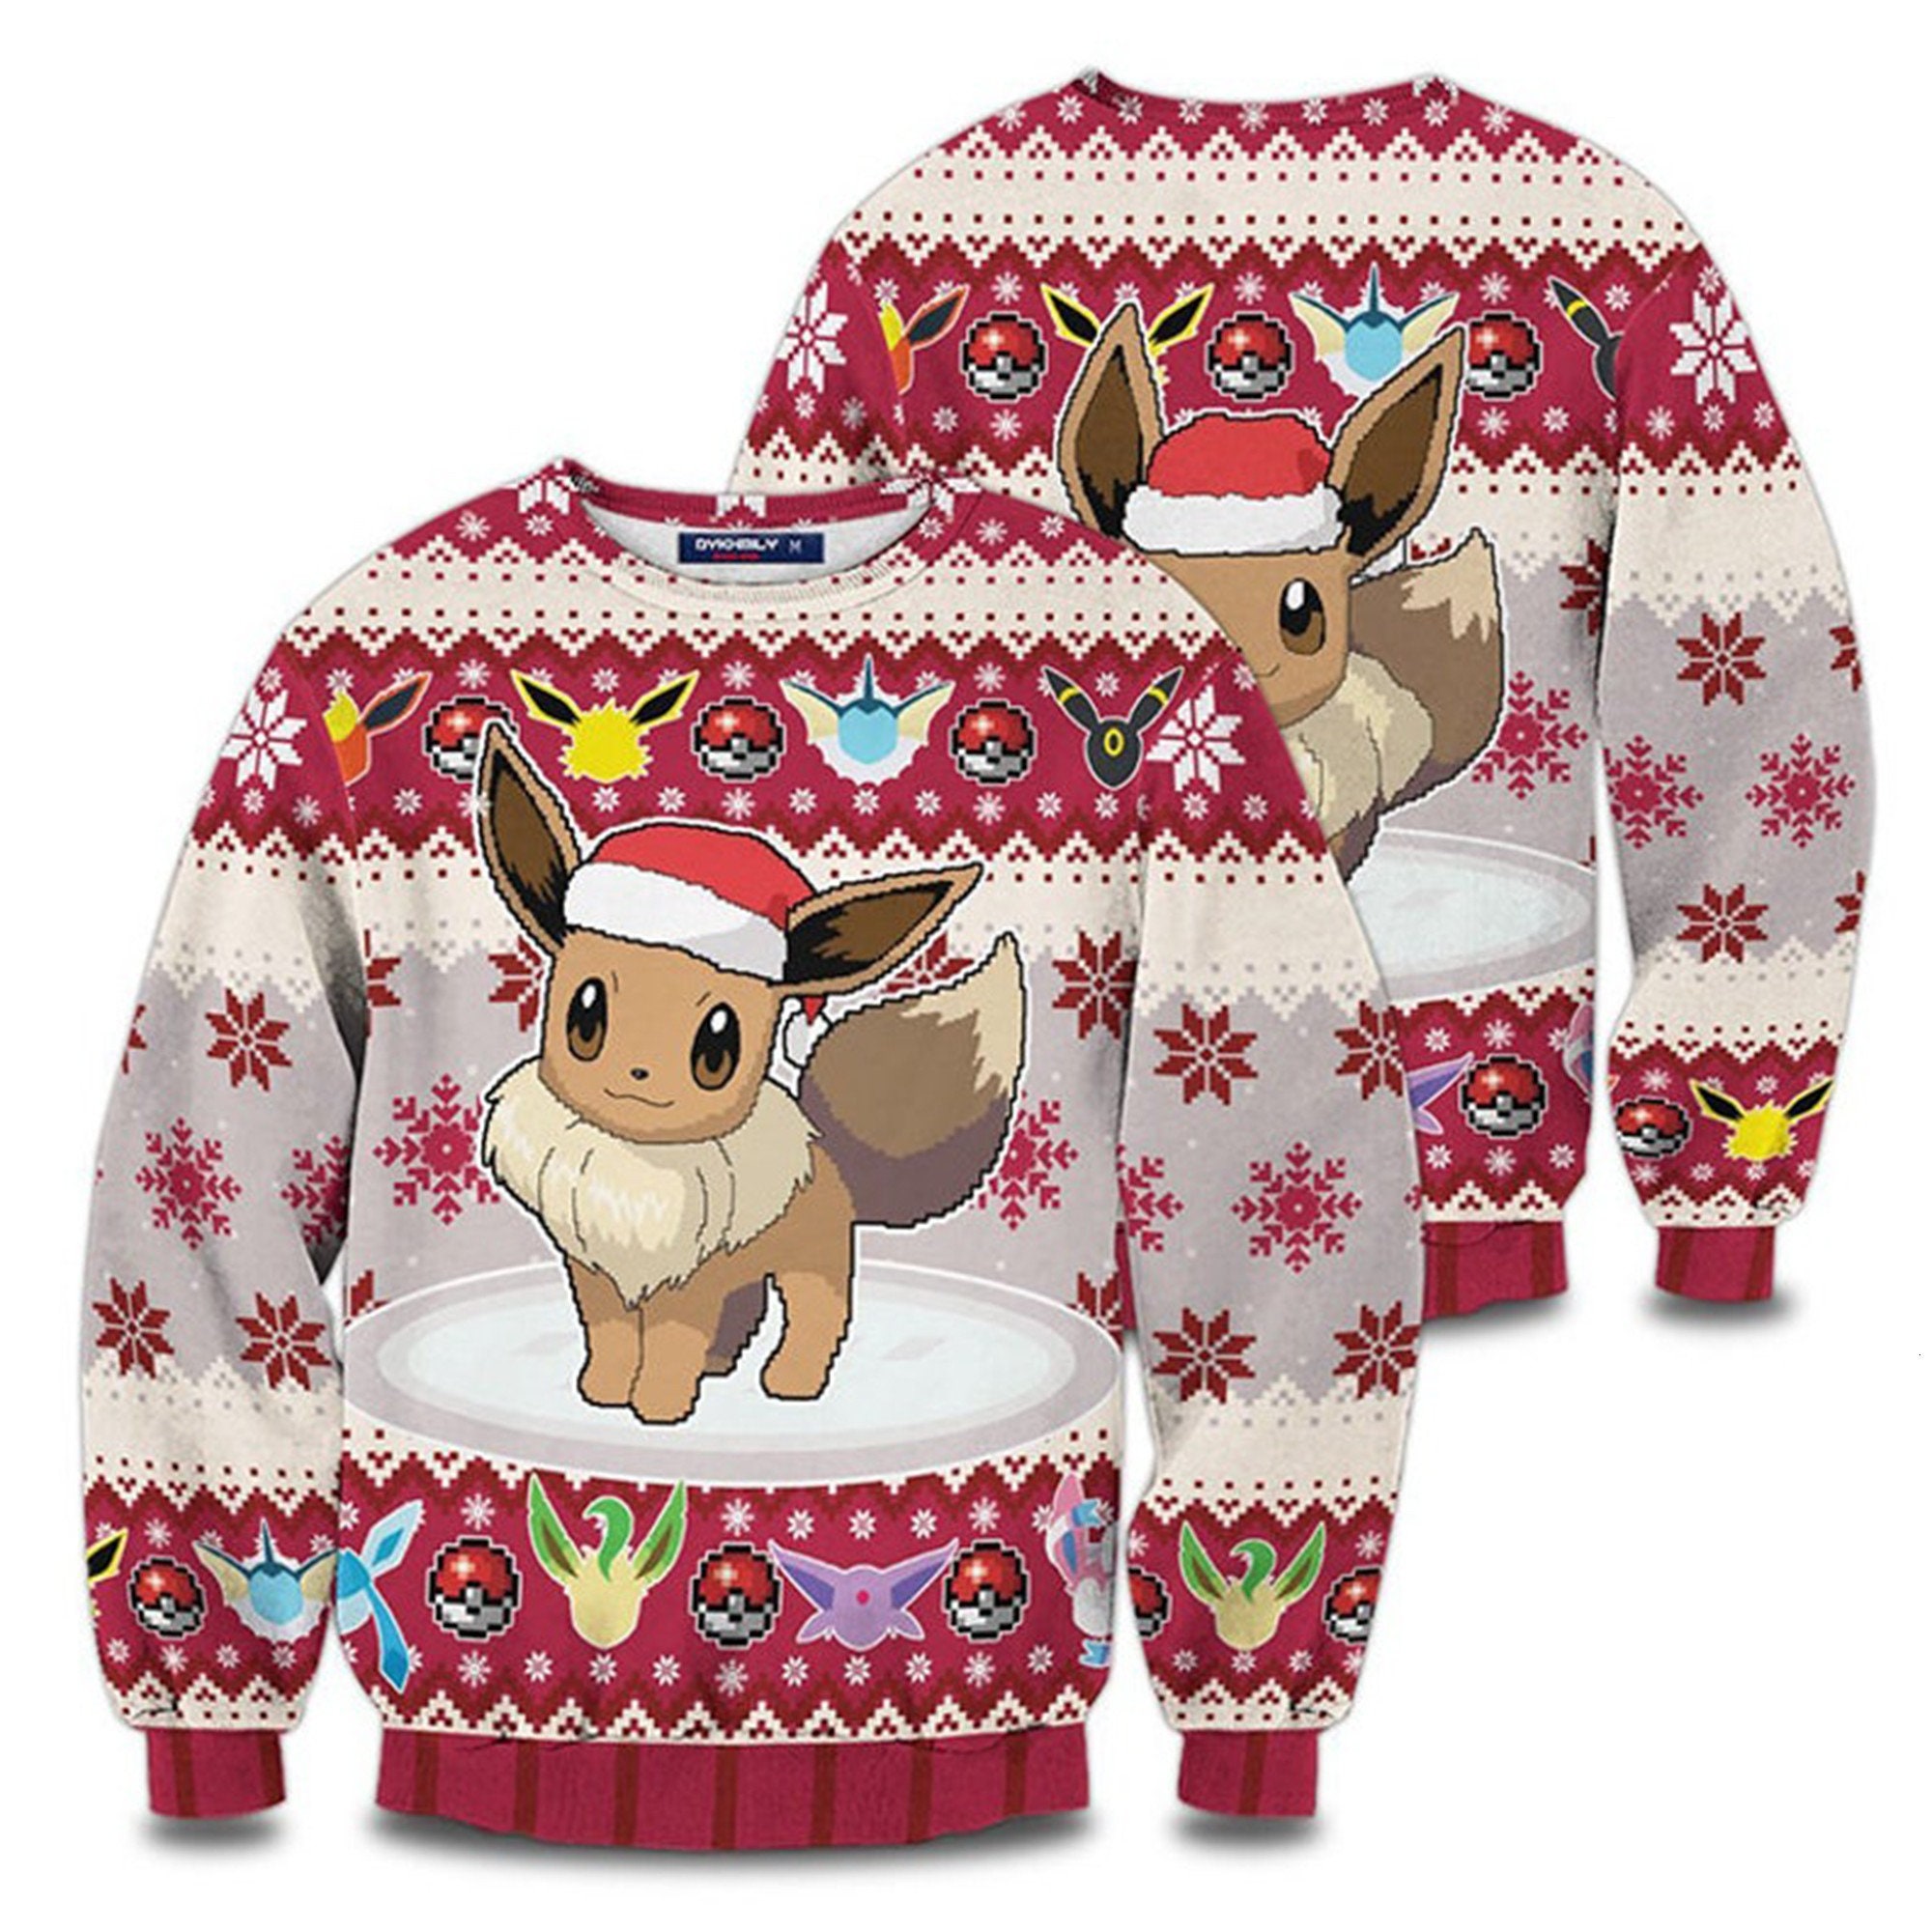 Eevee Christmas Sweater 2021 Gift For Fan